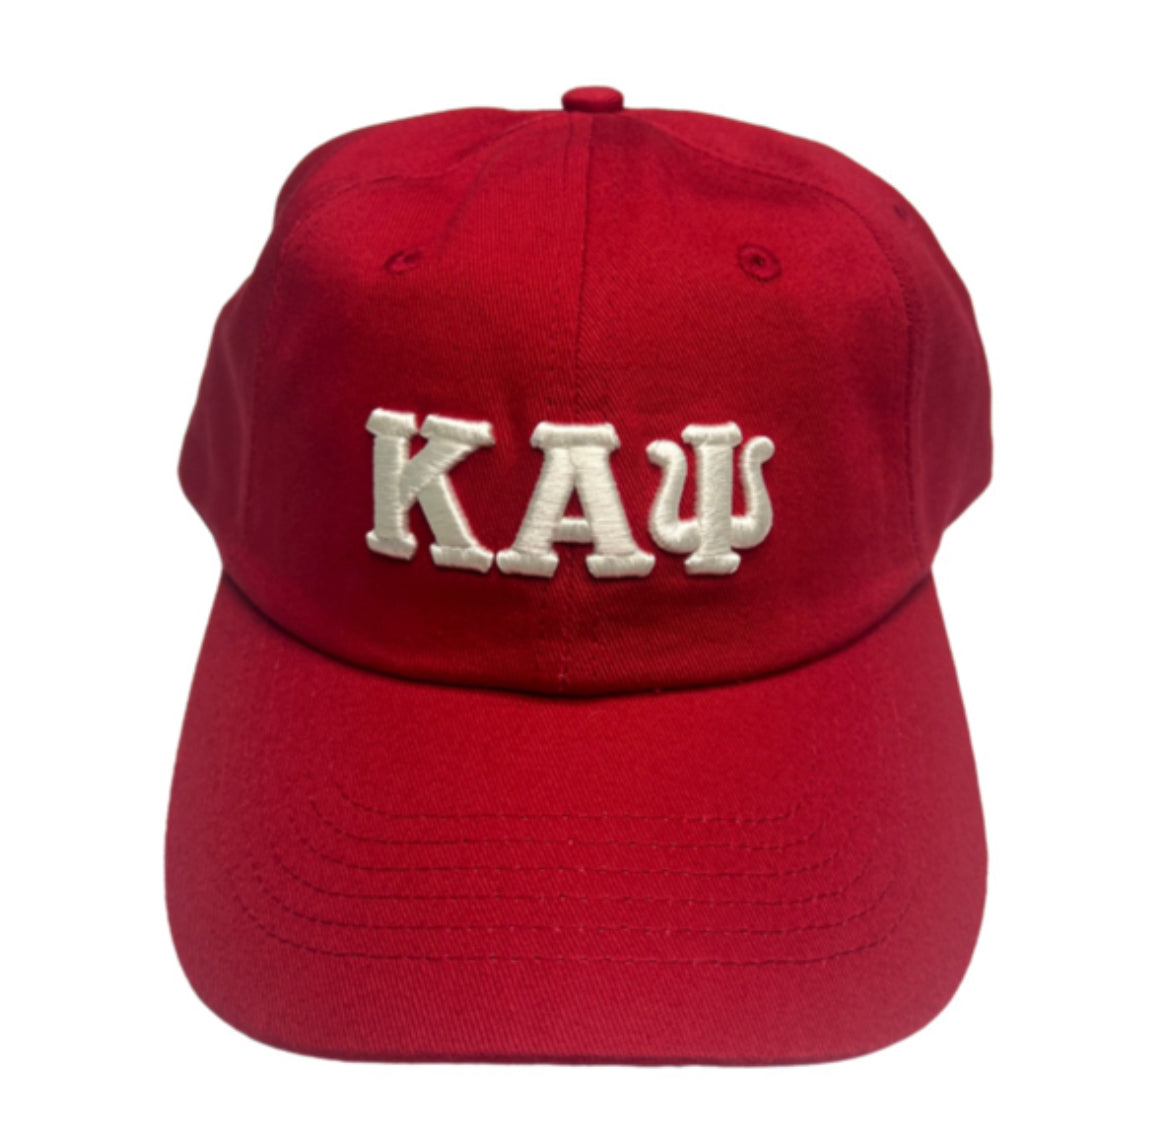 Show your love for Kappa Alpha Psi with this stylish crimson baseball hat. Perfect for members of the fraternity , this hat is a must-have addition to your collection. Wear it to events, parties or just on a casual day out. This hat features the iconic Kappa Alpha Psi design that is sure to turn heads and make a statement.